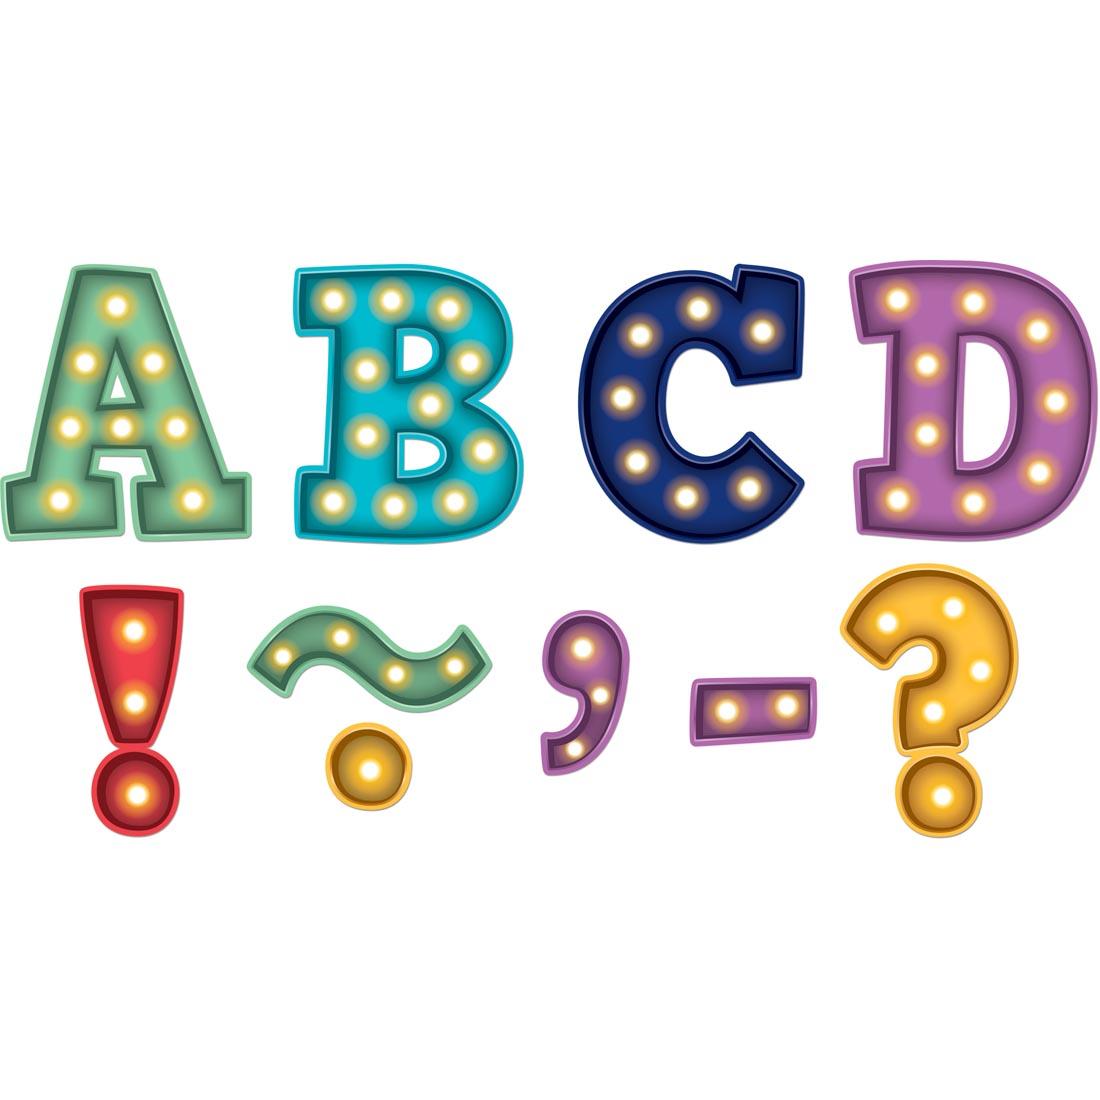 Bold Block 3" Magnetic Letters from the Marquee collection by Teacher Created Resources